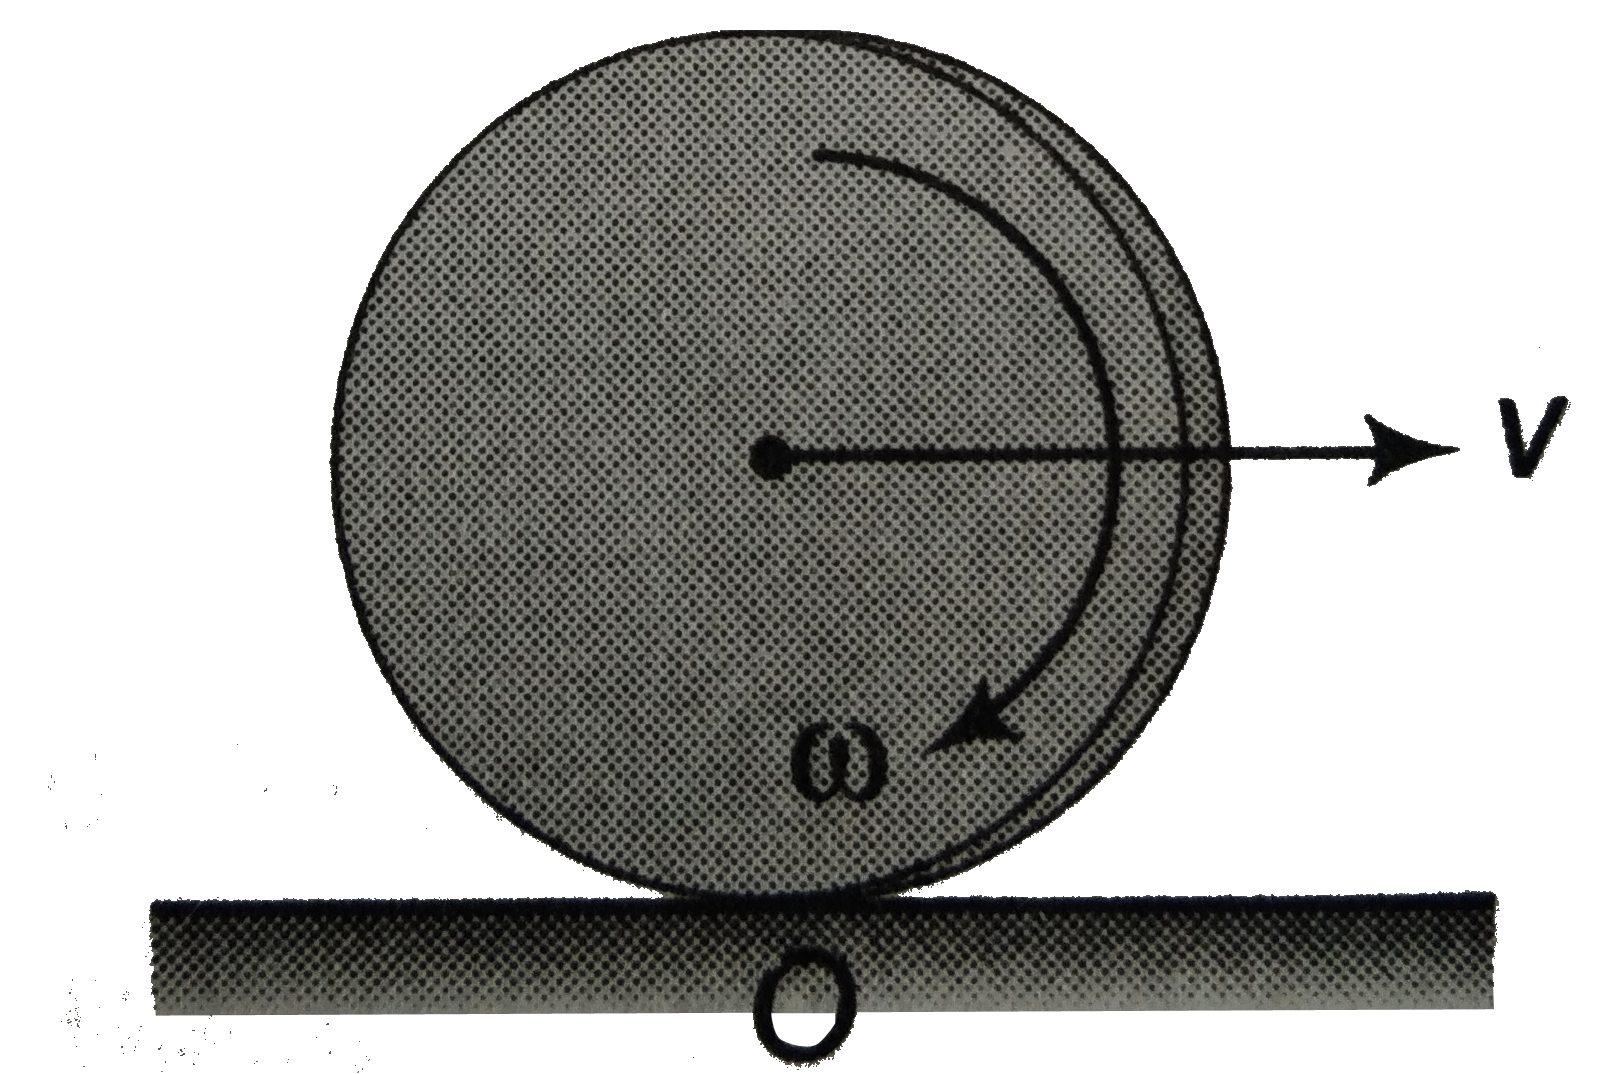 A cicular disc of mass m and radius R is set into motion on a horizontal floor with a linear speed v in the forward direction and an angular speed omega=(v)/(R) in clockwise direction as shown in figure. Find the magnitude of the total angular momentum of the disc about bottom most point O of the disc.